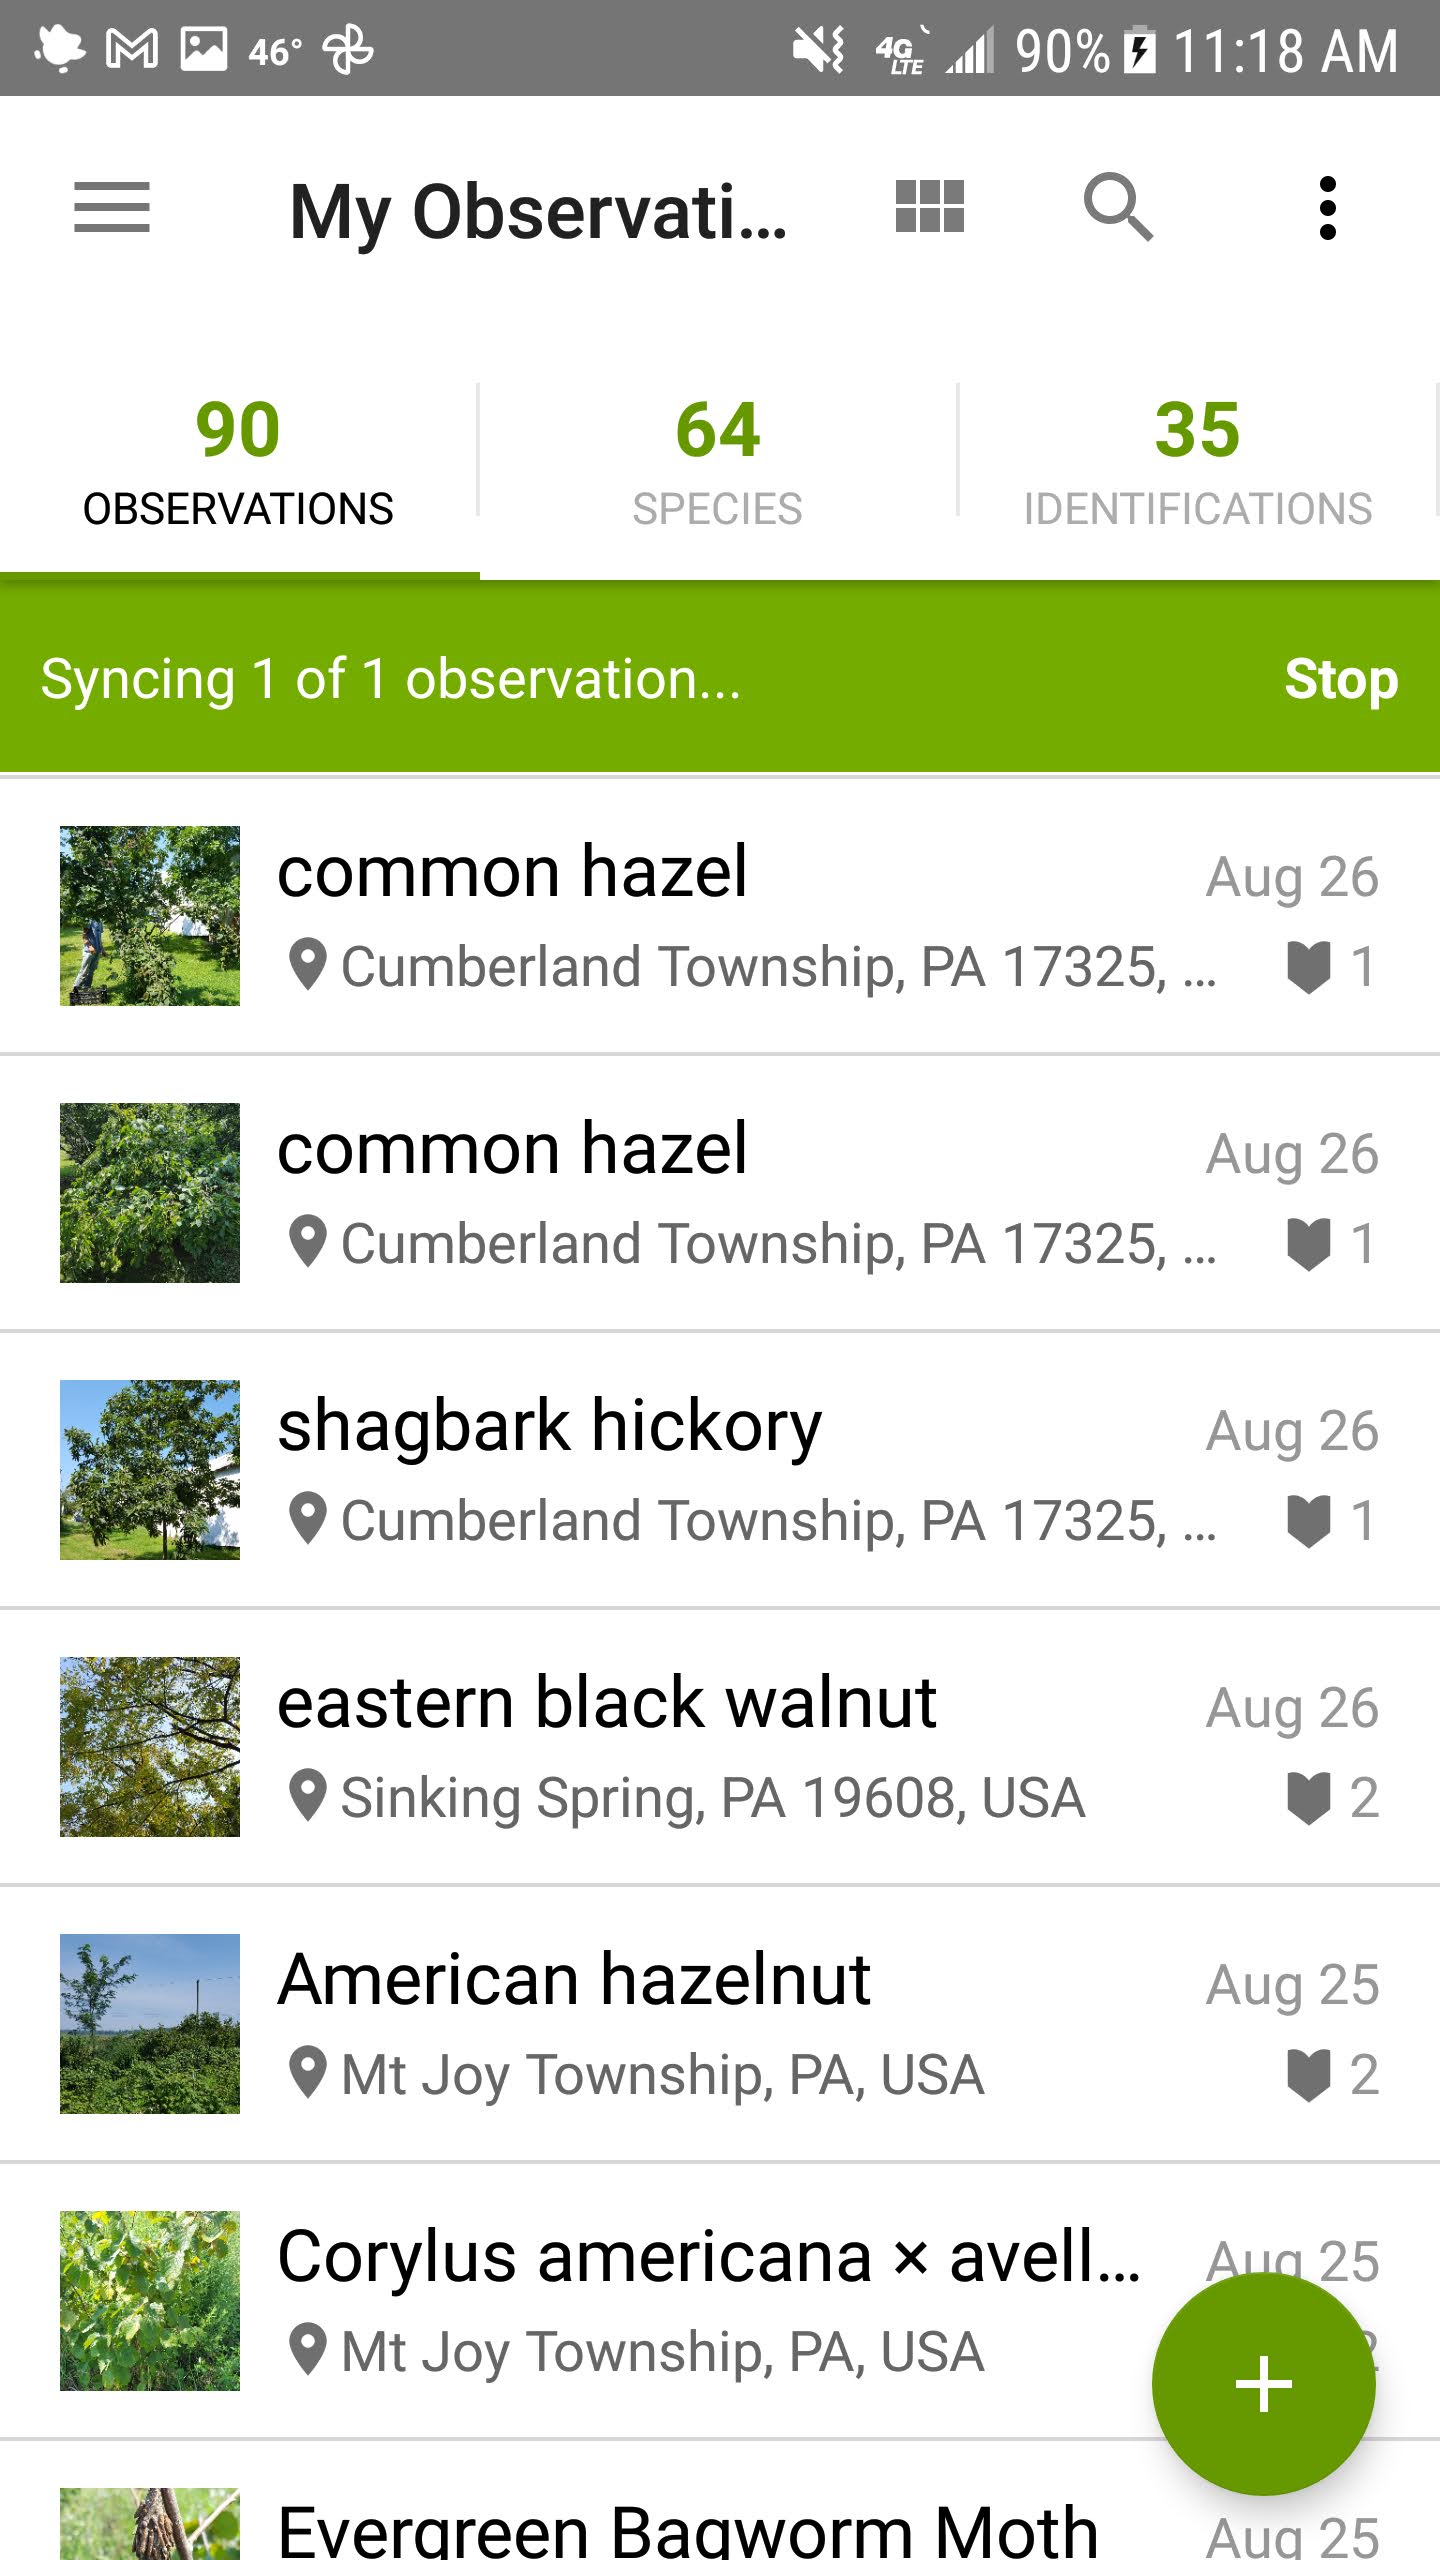 iNaturalist page with observation added and syncing.